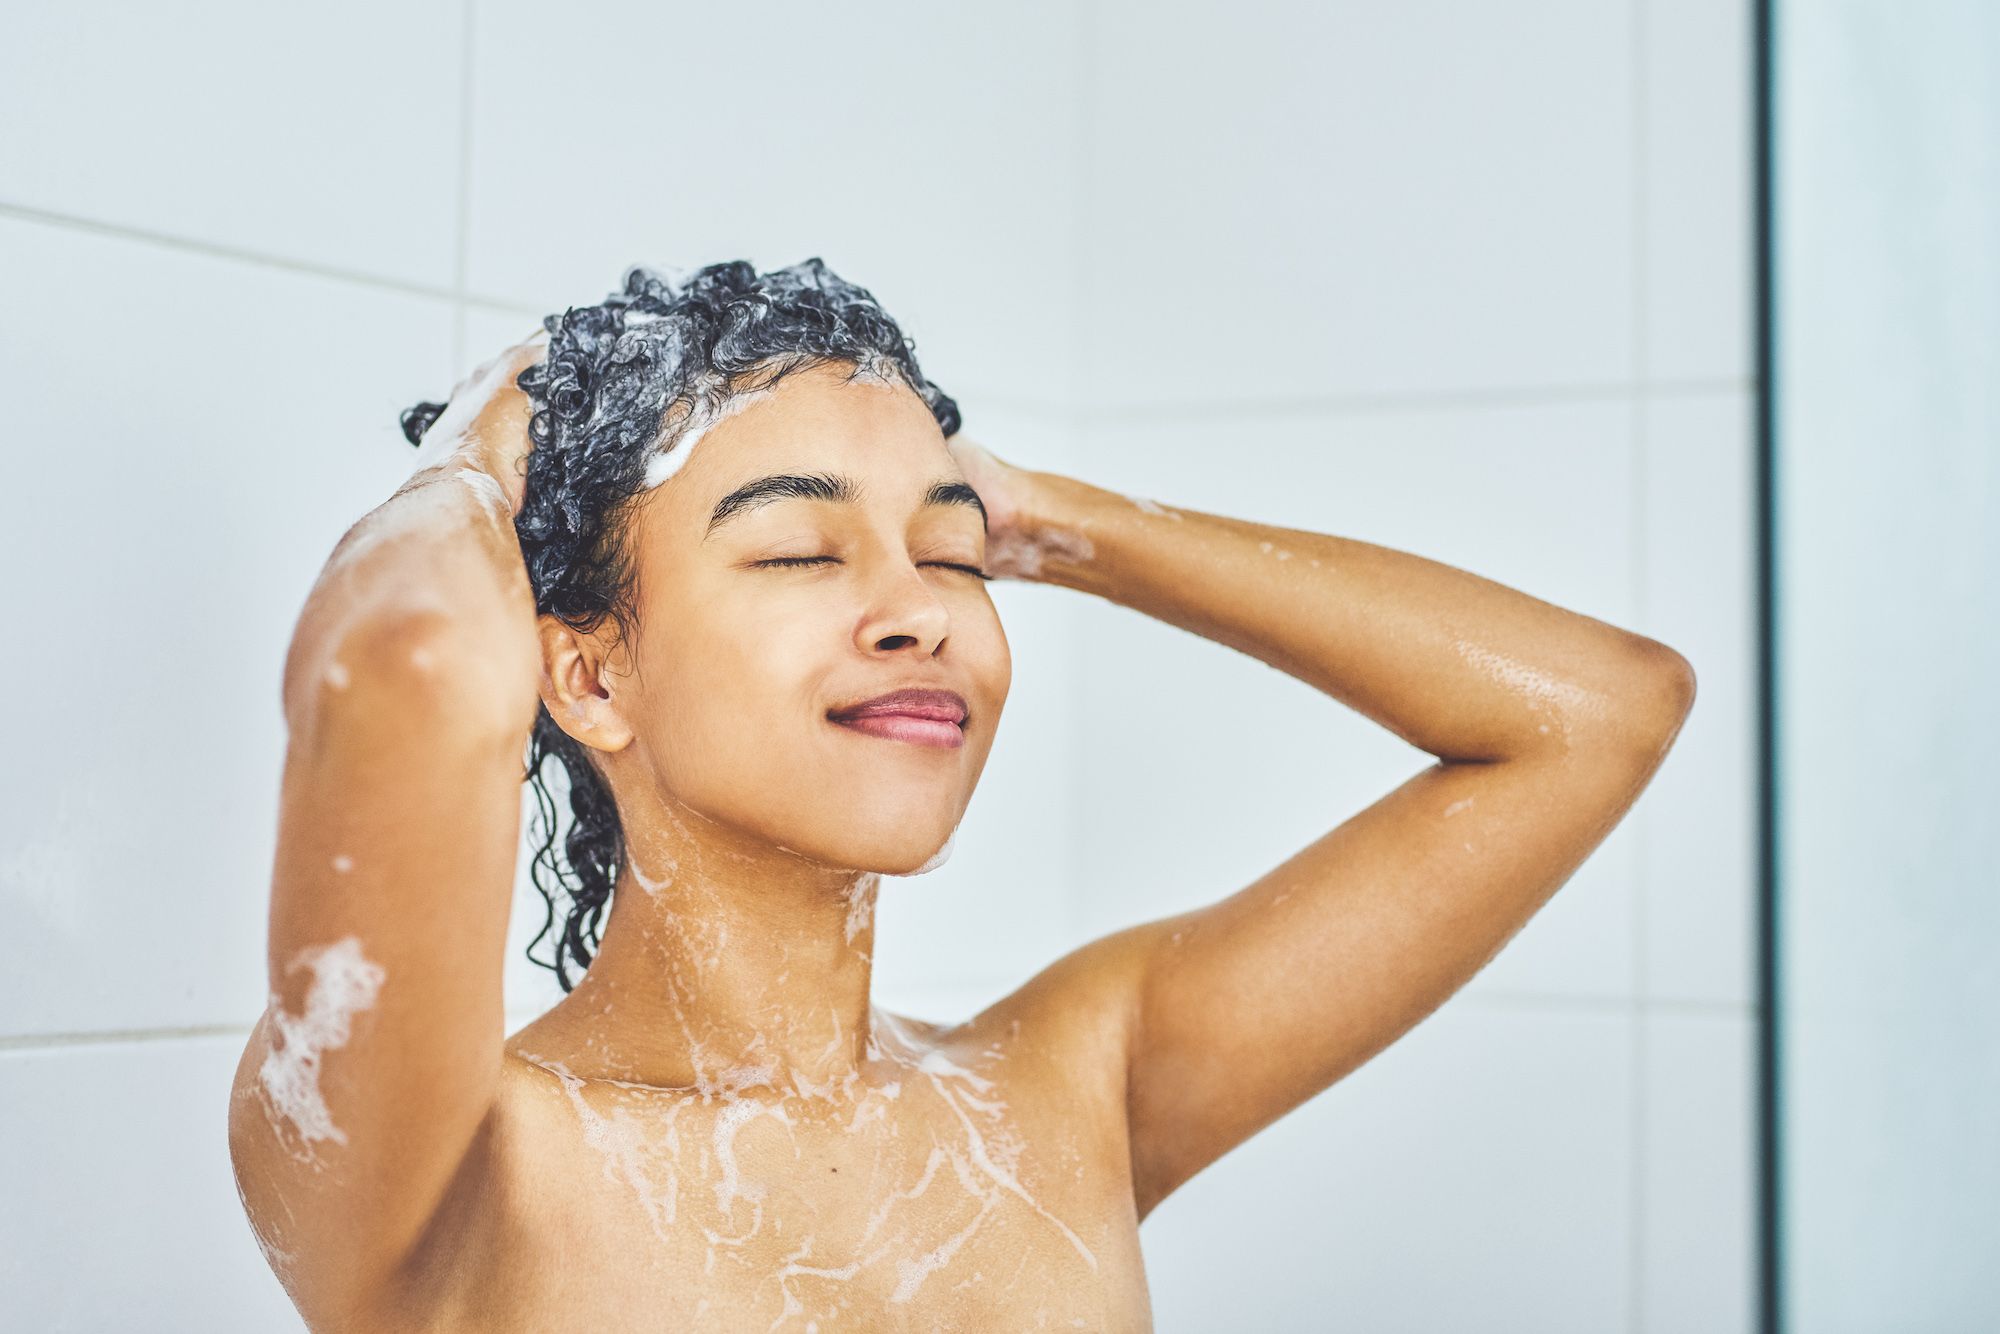 Found: The Very Best, Incredibly Moisturizing Shampoos for Dry Hair